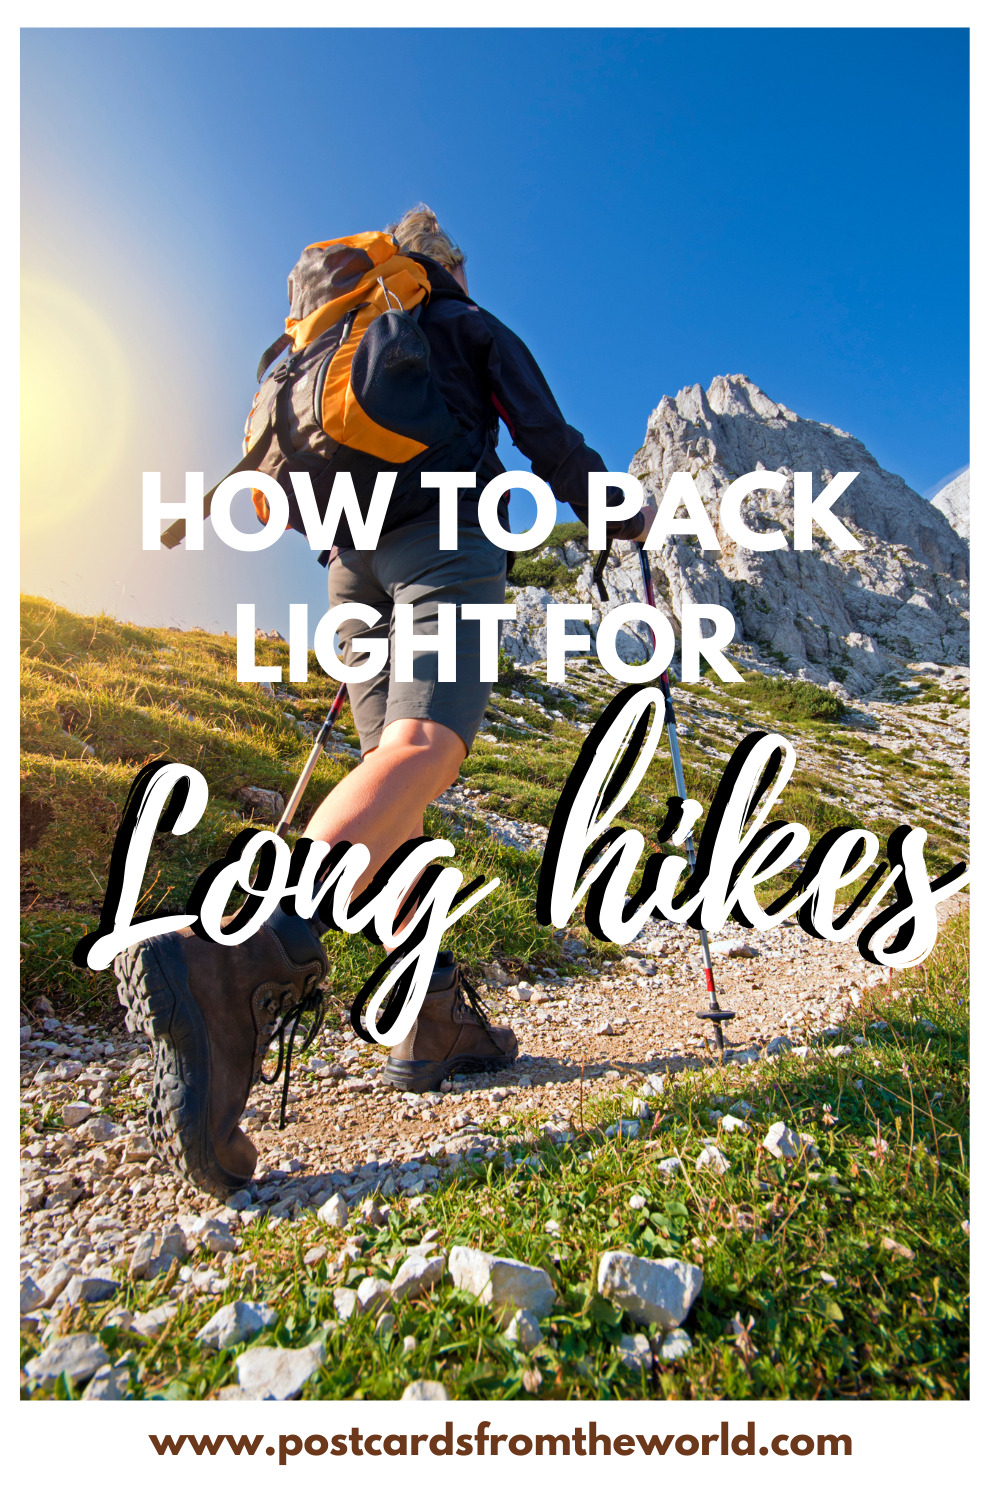 12 tips to pack light for long hikes